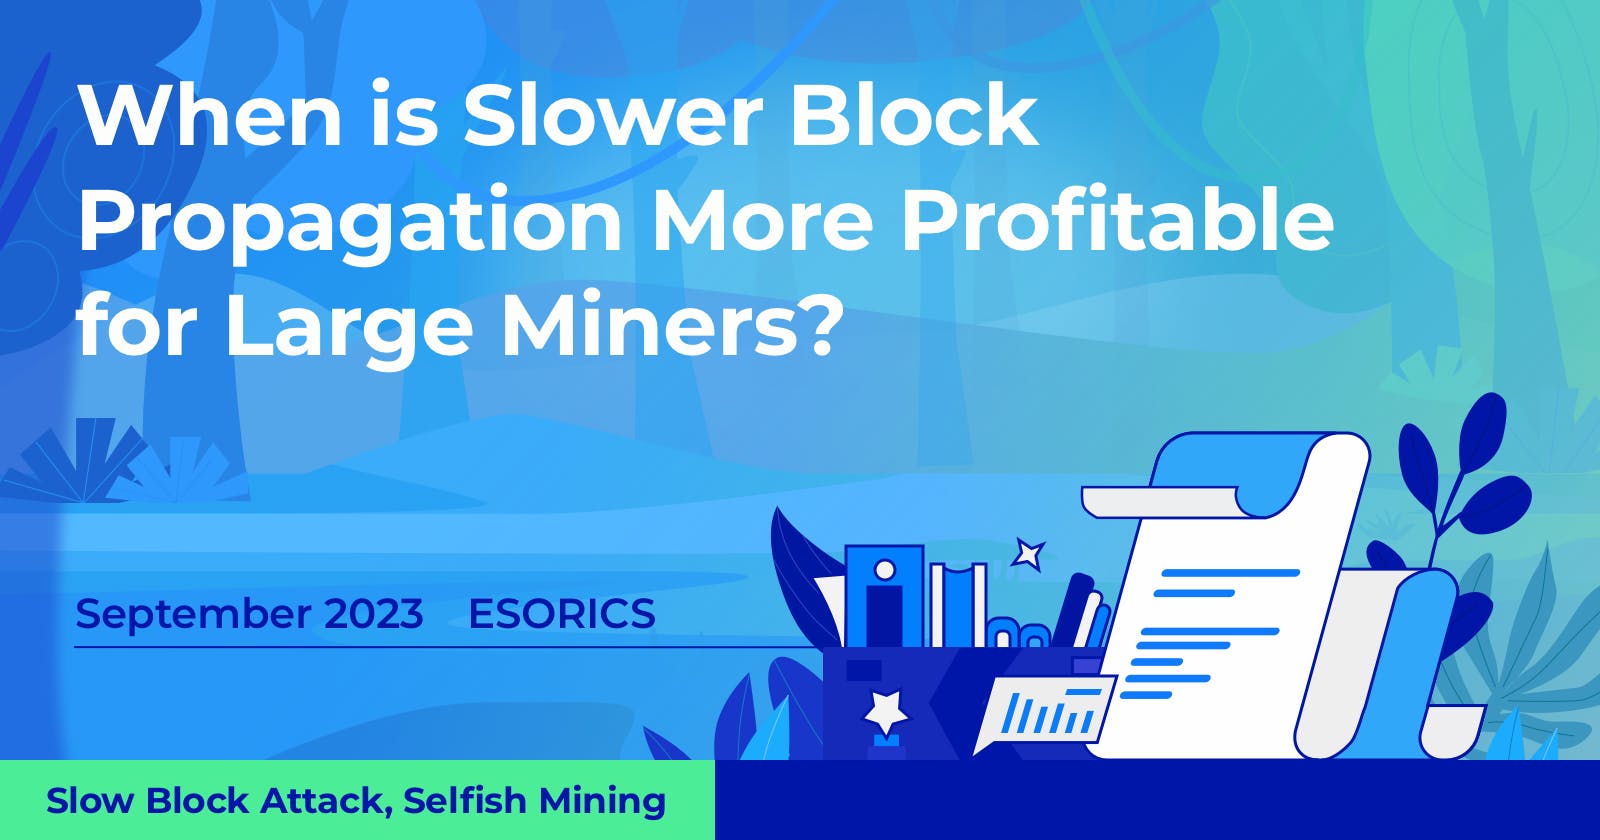 When is Slower Block Propagation More Profitable for Large Miners?